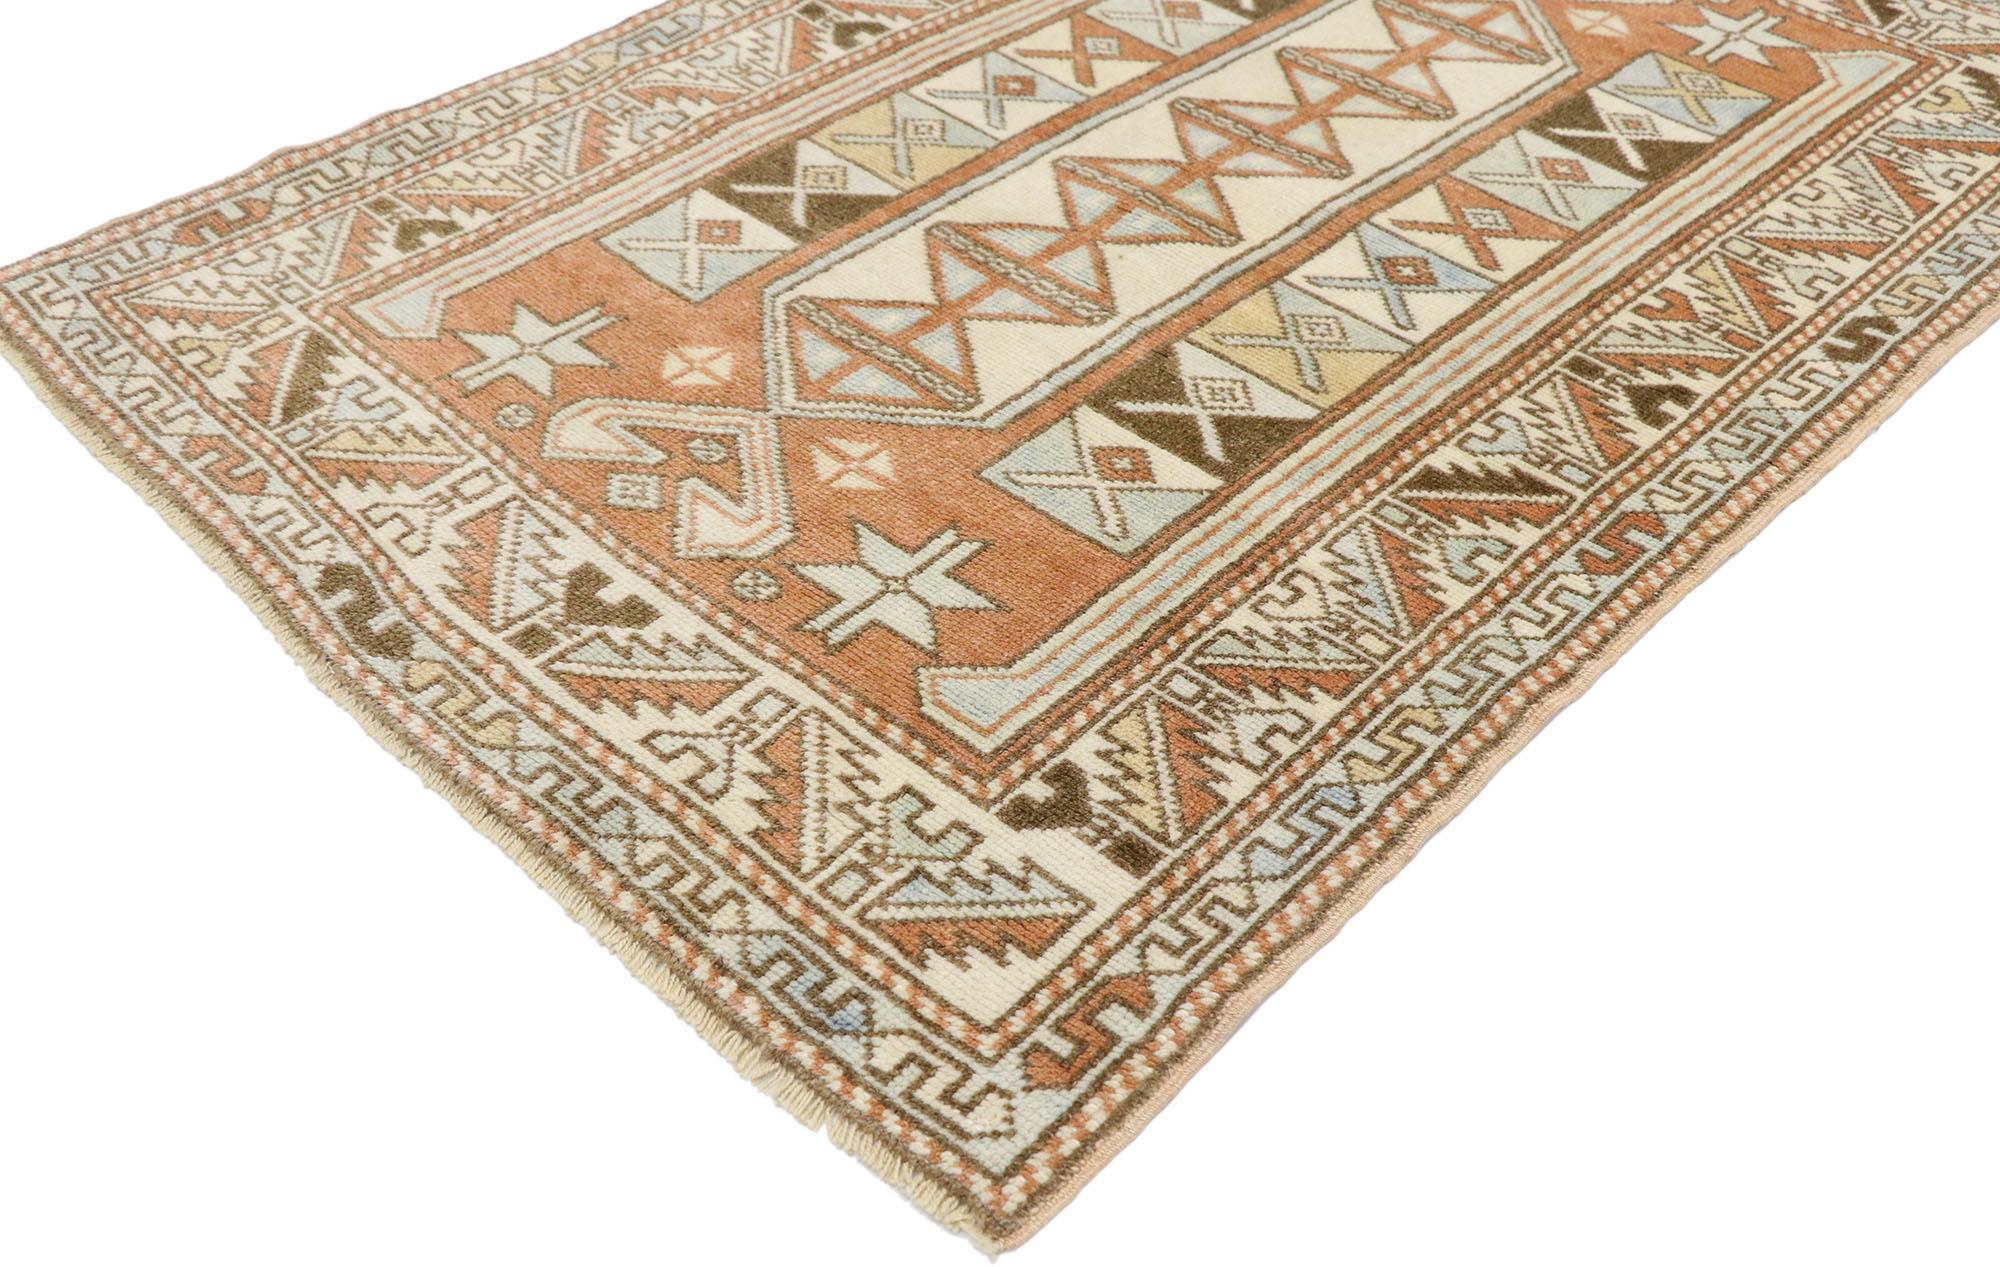 53522, vintage Turkish Oushak rug with southwestern tribal style 02'10 x 04'03. Full of tiny details and a bold expressive design combined with exuberant colors and Southwestern style, this hand-knotted wool vintage Turkish Oushak rug is a